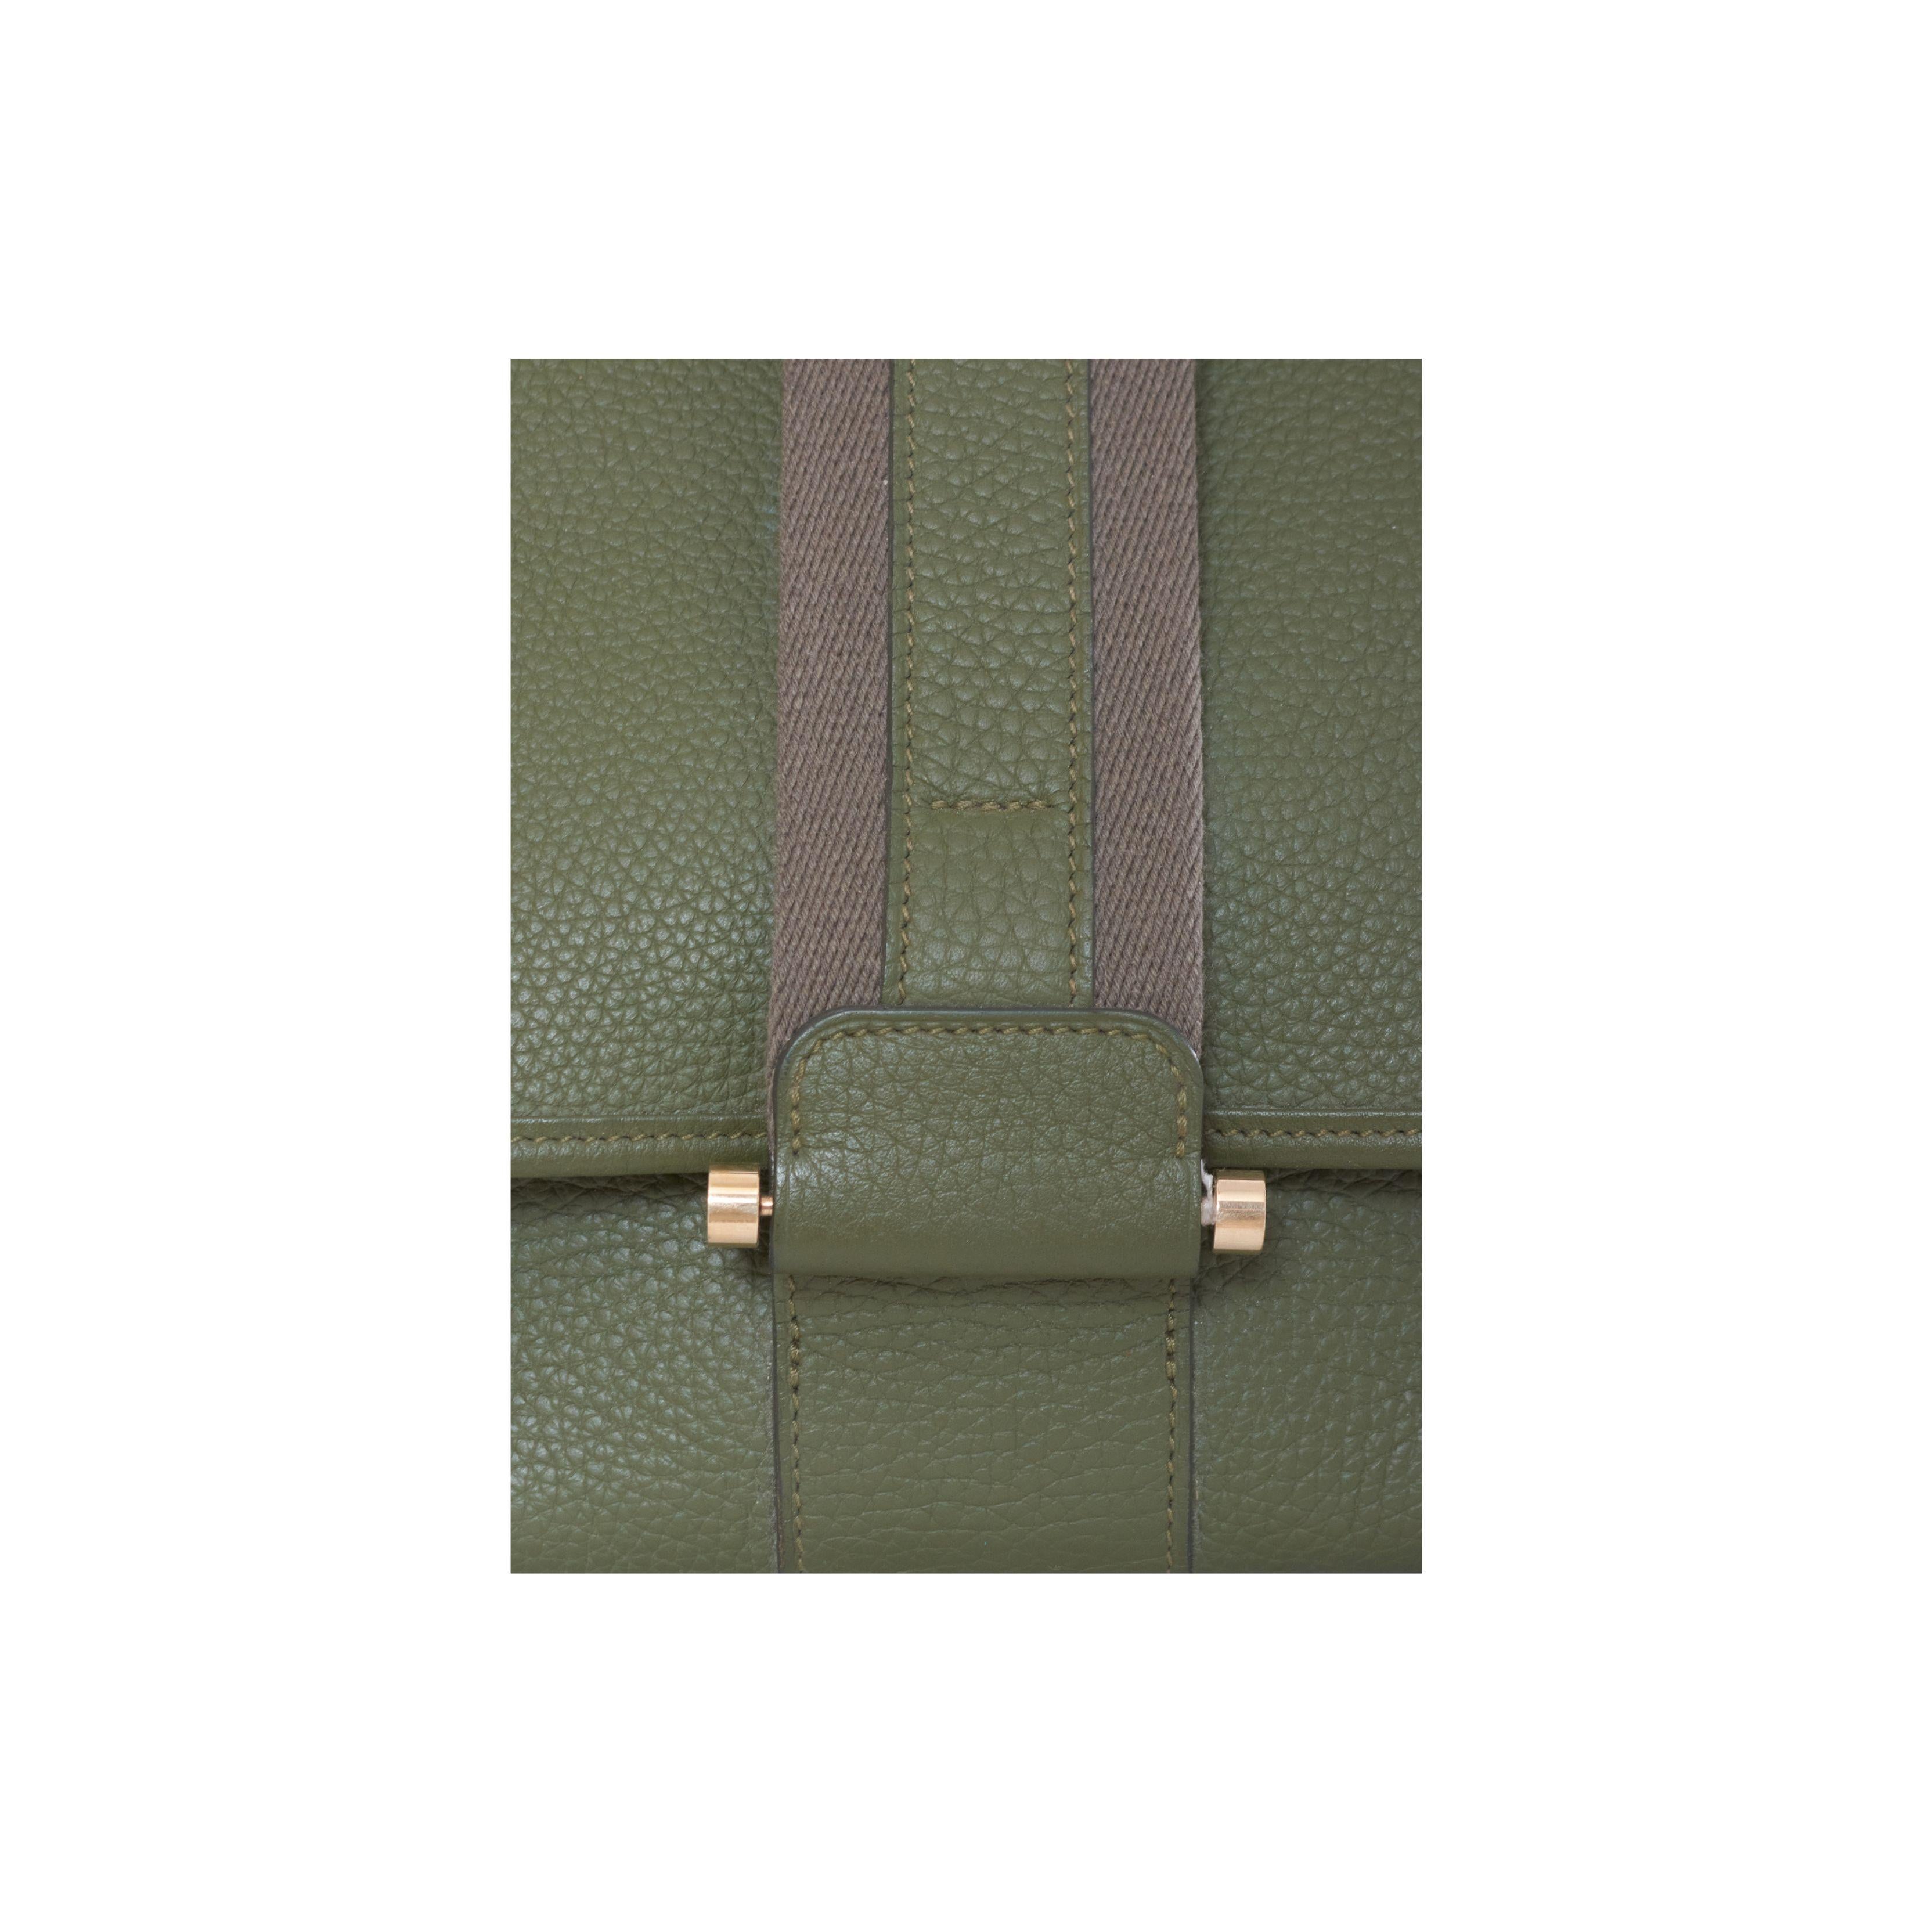 Hermès' Bourlingue shoulder bag is a handcrafted work of art that embodies the essence of luxury and quality. Made of high-quality green grained leather, the bag features a surface with a unique and delicate texture. Grained leather makes the bag